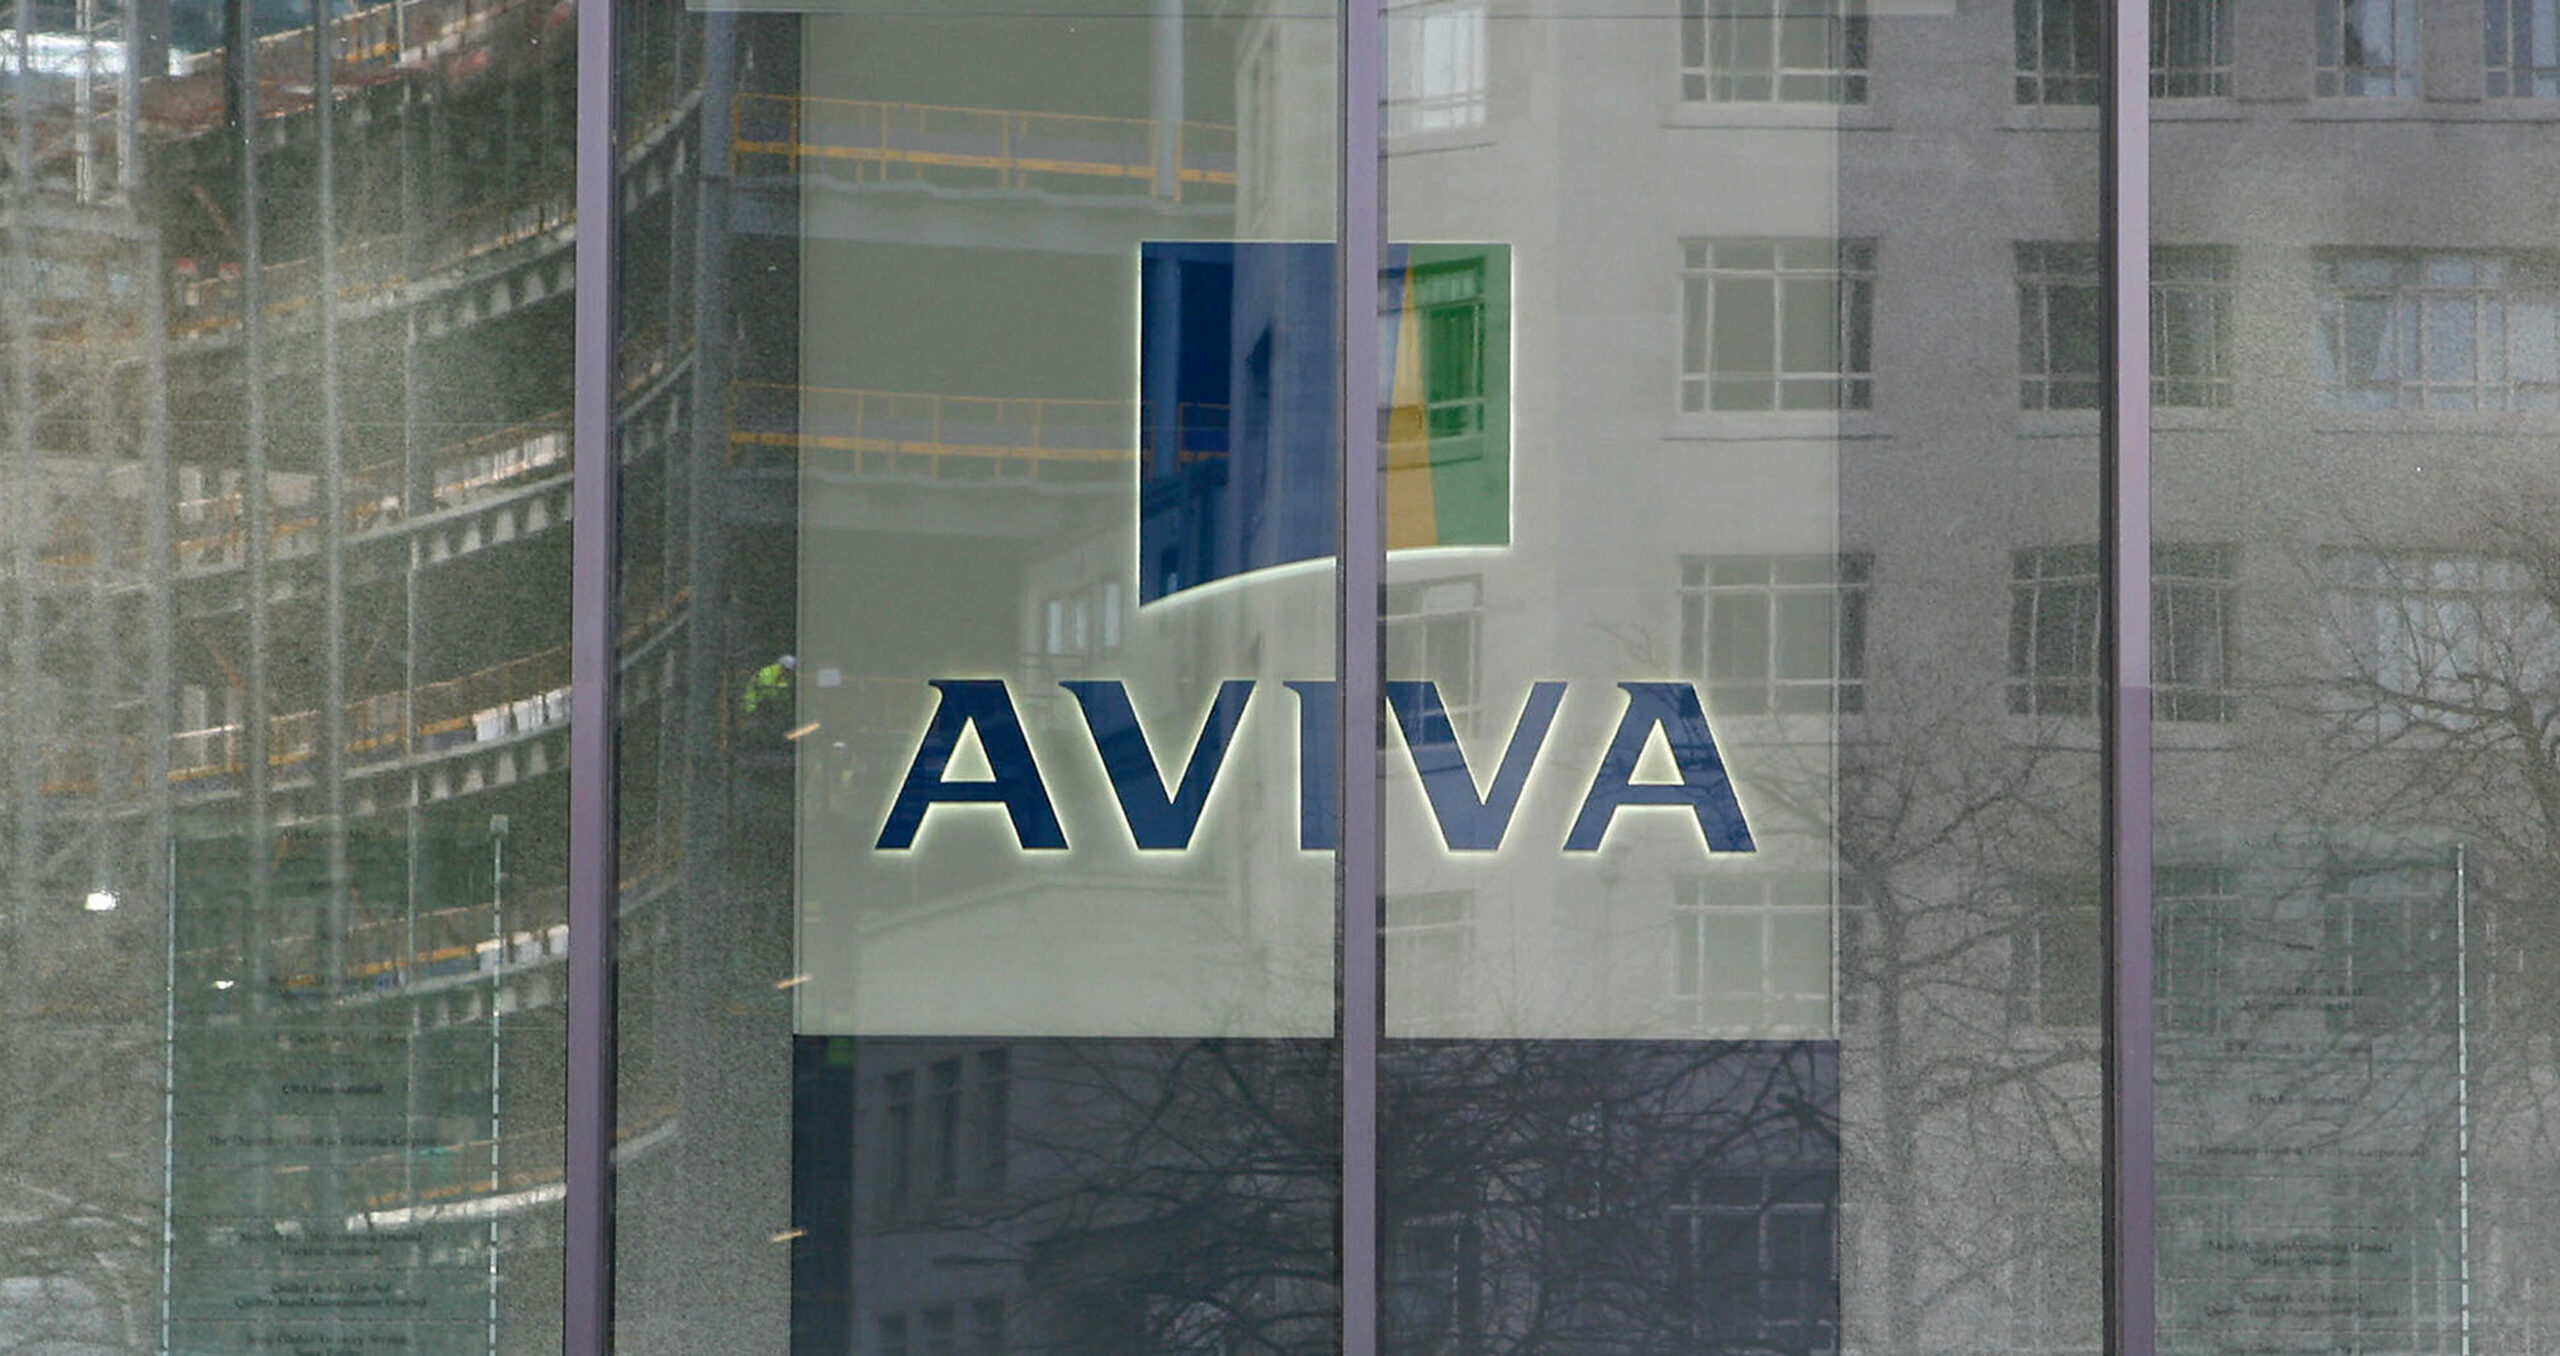 UK insurance giant Aviva says that as a D&O insurer, it is “increasingly observing climate disclosures of our insureds to consider whether they are accurate, credible and achievable” (Photo: Ben StansallAFP via Getty Images) 